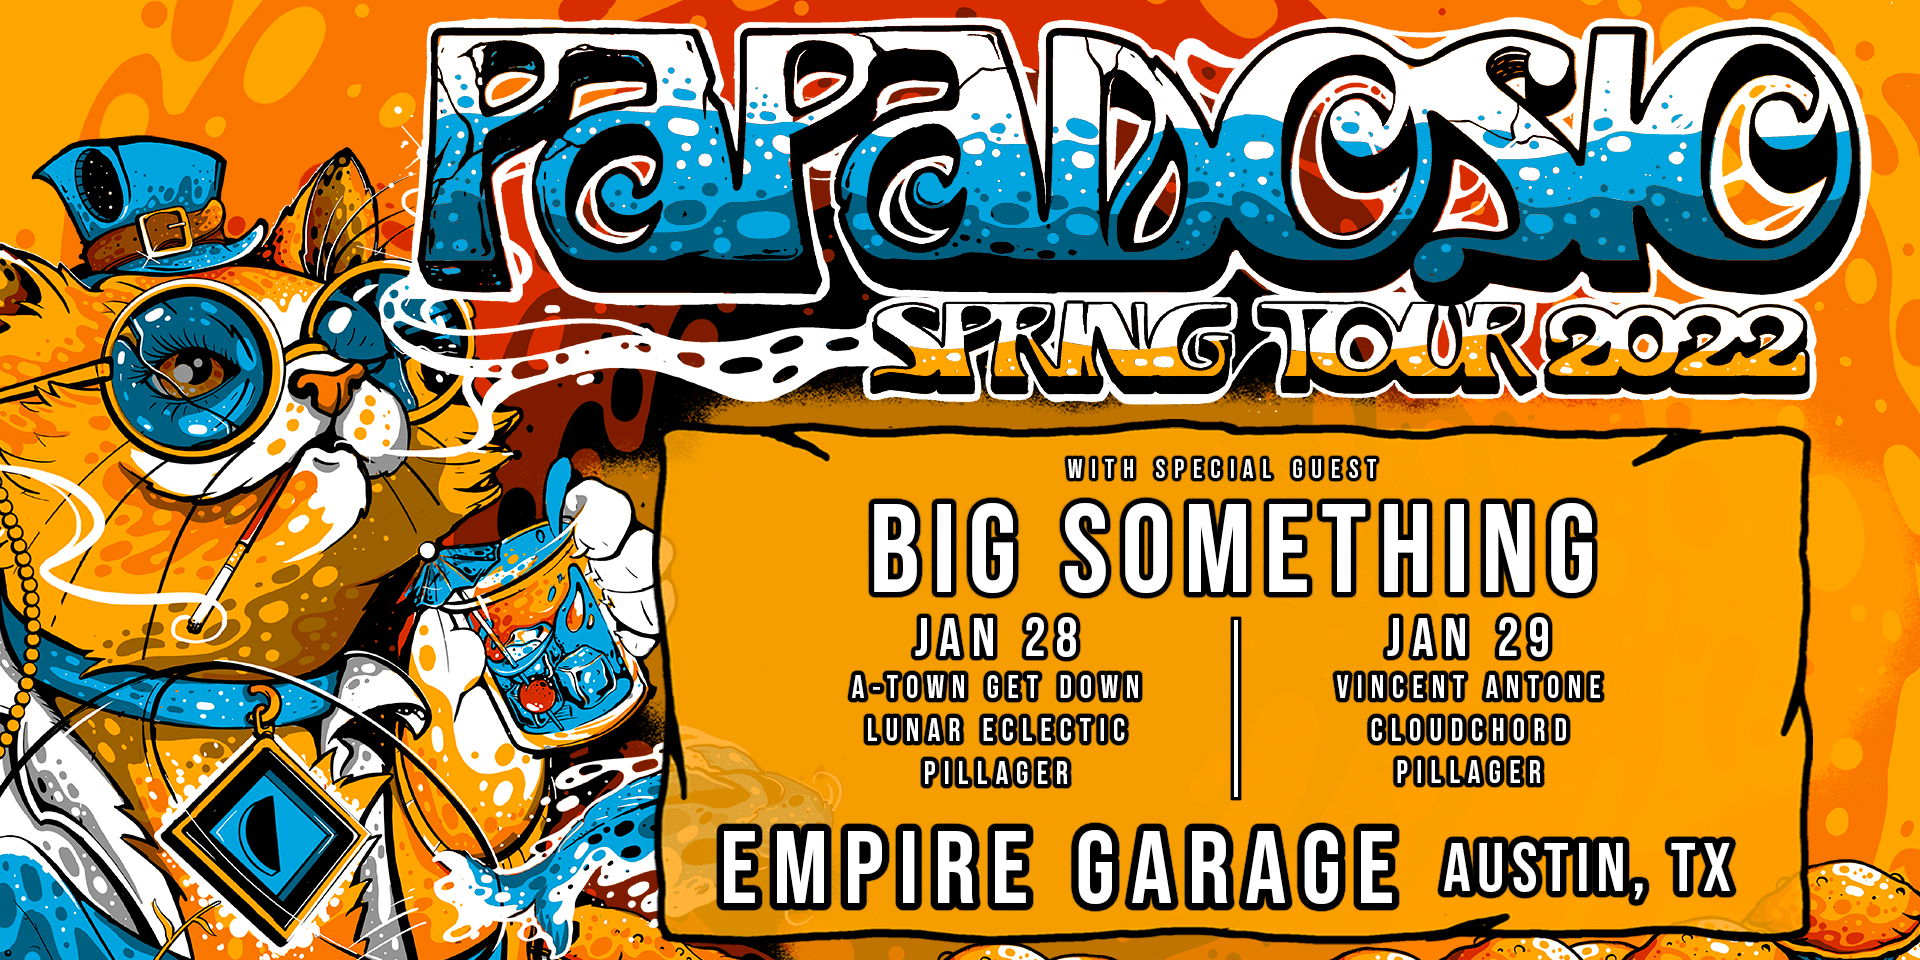 Papadosio w/ Special Guest Big Something at Empire Garage - 1/29 promotional image